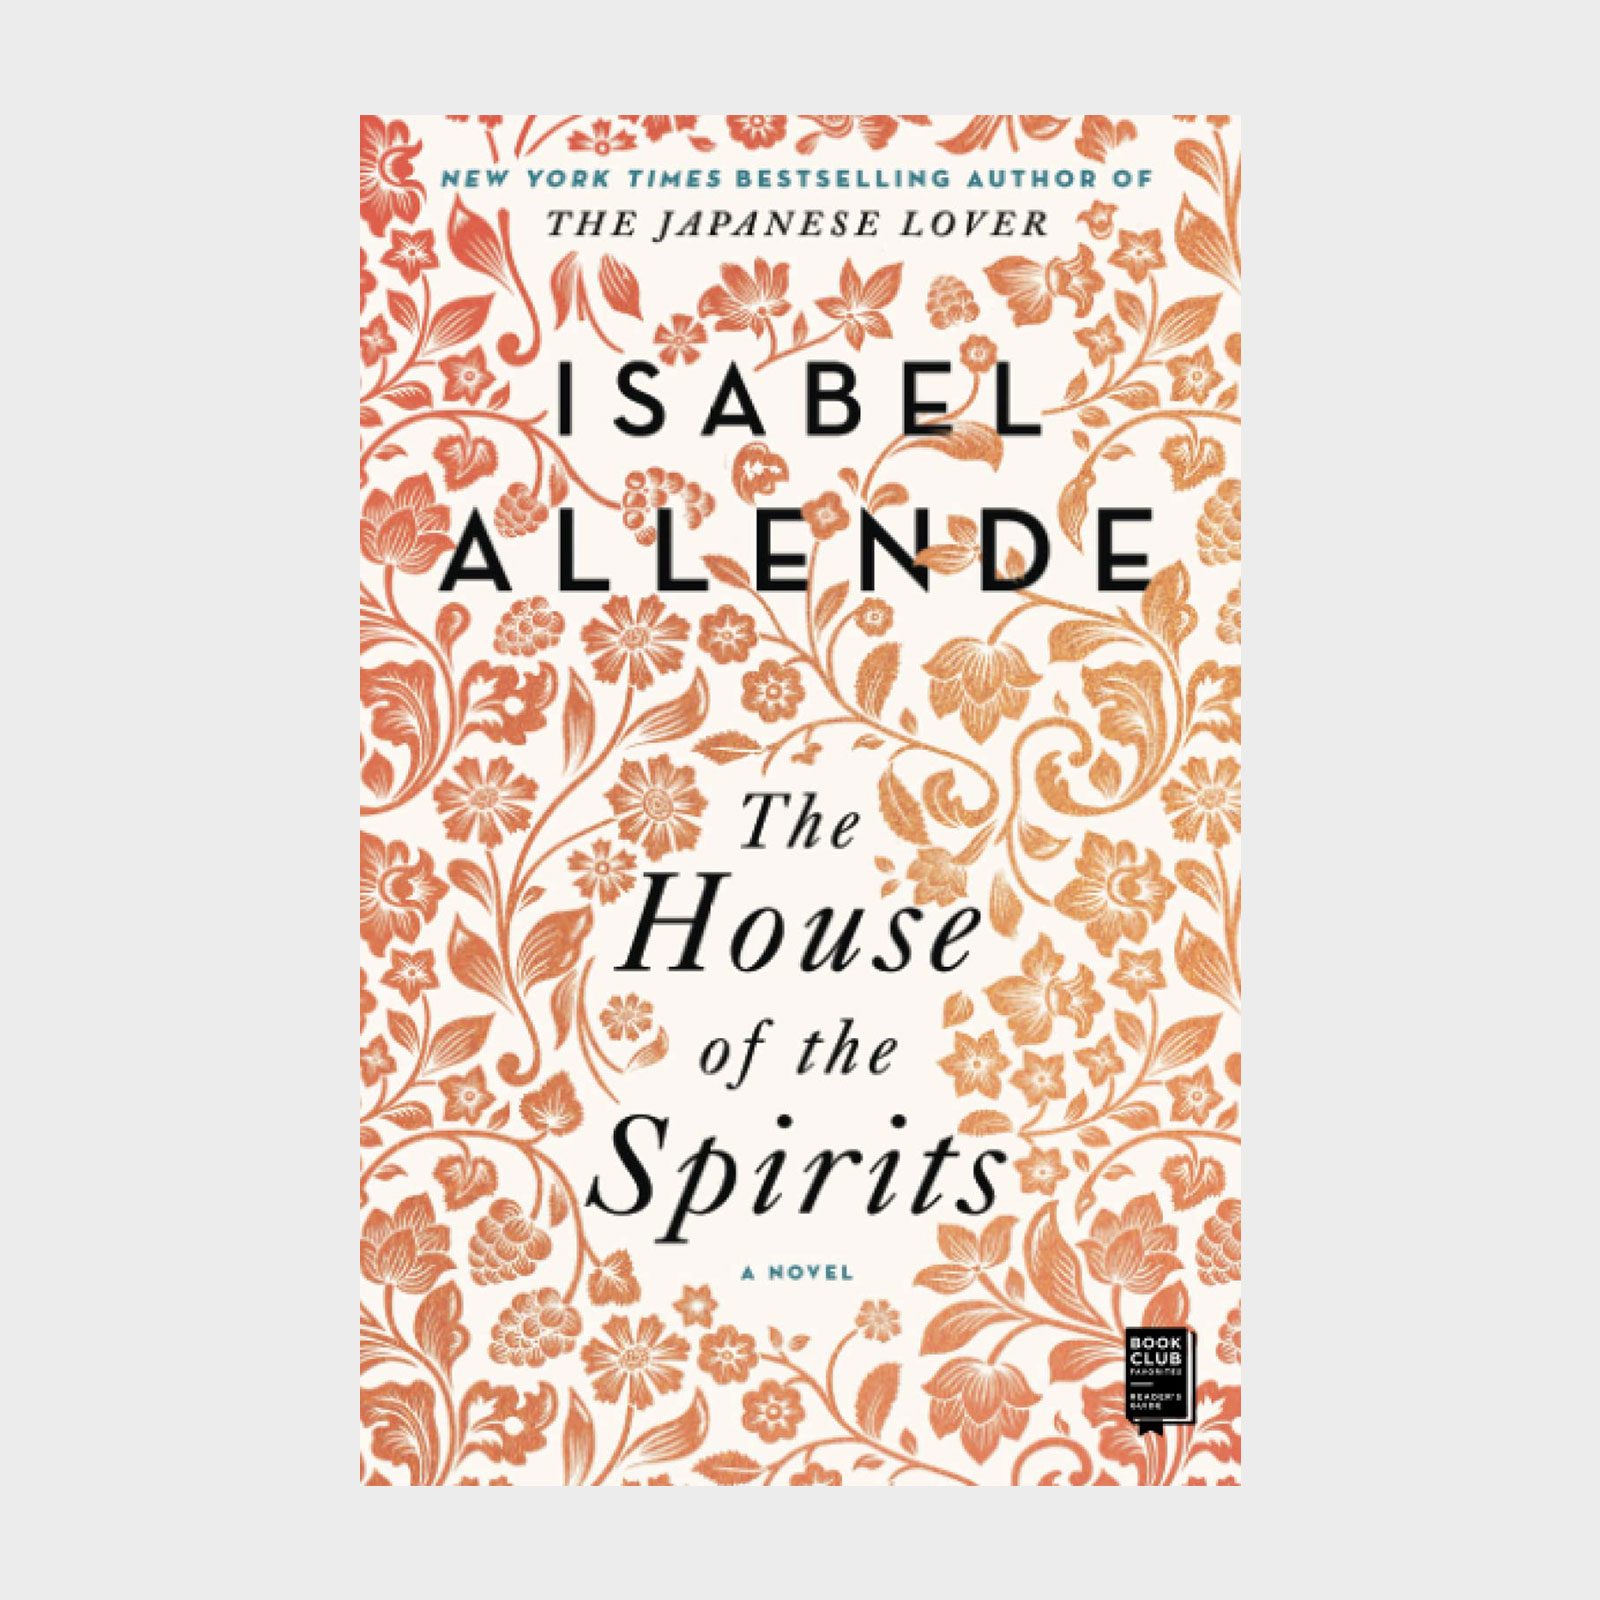 <p>With 26 books translated into over 42 languages and more than 77 million copies sold worldwide, Isabel Allende is the bestselling Spanish-language author of all time. I once had the honor of interviewing the Chilean writer, and she recounted how she started working on <a href="https://www.amazon.com/House-Spirits-Novel-Isabel-Allende/dp/1501117017" rel="noopener noreferrer"><em>The House of the Spirits</em></a>: She began her epic, multigenerational debut novel on Jan. 8, 1981, after writing a letter to her dying grandfather, who she couldn't visit because her family was in political exile in Venezuela. (Fun fact: Allende now starts all her novels on Jan. 8.)</p> <p>The story centers on the Truebe family and its clairvoyant matriarch, Clara, who's based on Allende's grandmother. The saga follows Clara's husband, the power-hungry Esteban, their lovelorn daughter, Blanca, and their revolutionary granddaughter, Alba. The novel, which was published in 1982, is a sweeping and touching tale that helps us better understand the complexity of Latin America, as well as the concepts of love and family. Give it a read, and you'll no doubt count Allende among your <a href="https://www.rd.com/list/favorite-authors/" rel="noopener noreferrer">favorite authors</a>.</p> <p class="listicle-page__cta-button-shop"><a class="shop-btn" href="https://www.amazon.com/House-Spirits-Novel-Isabel-Allende/dp/1501117017">Shop Now</a></p>